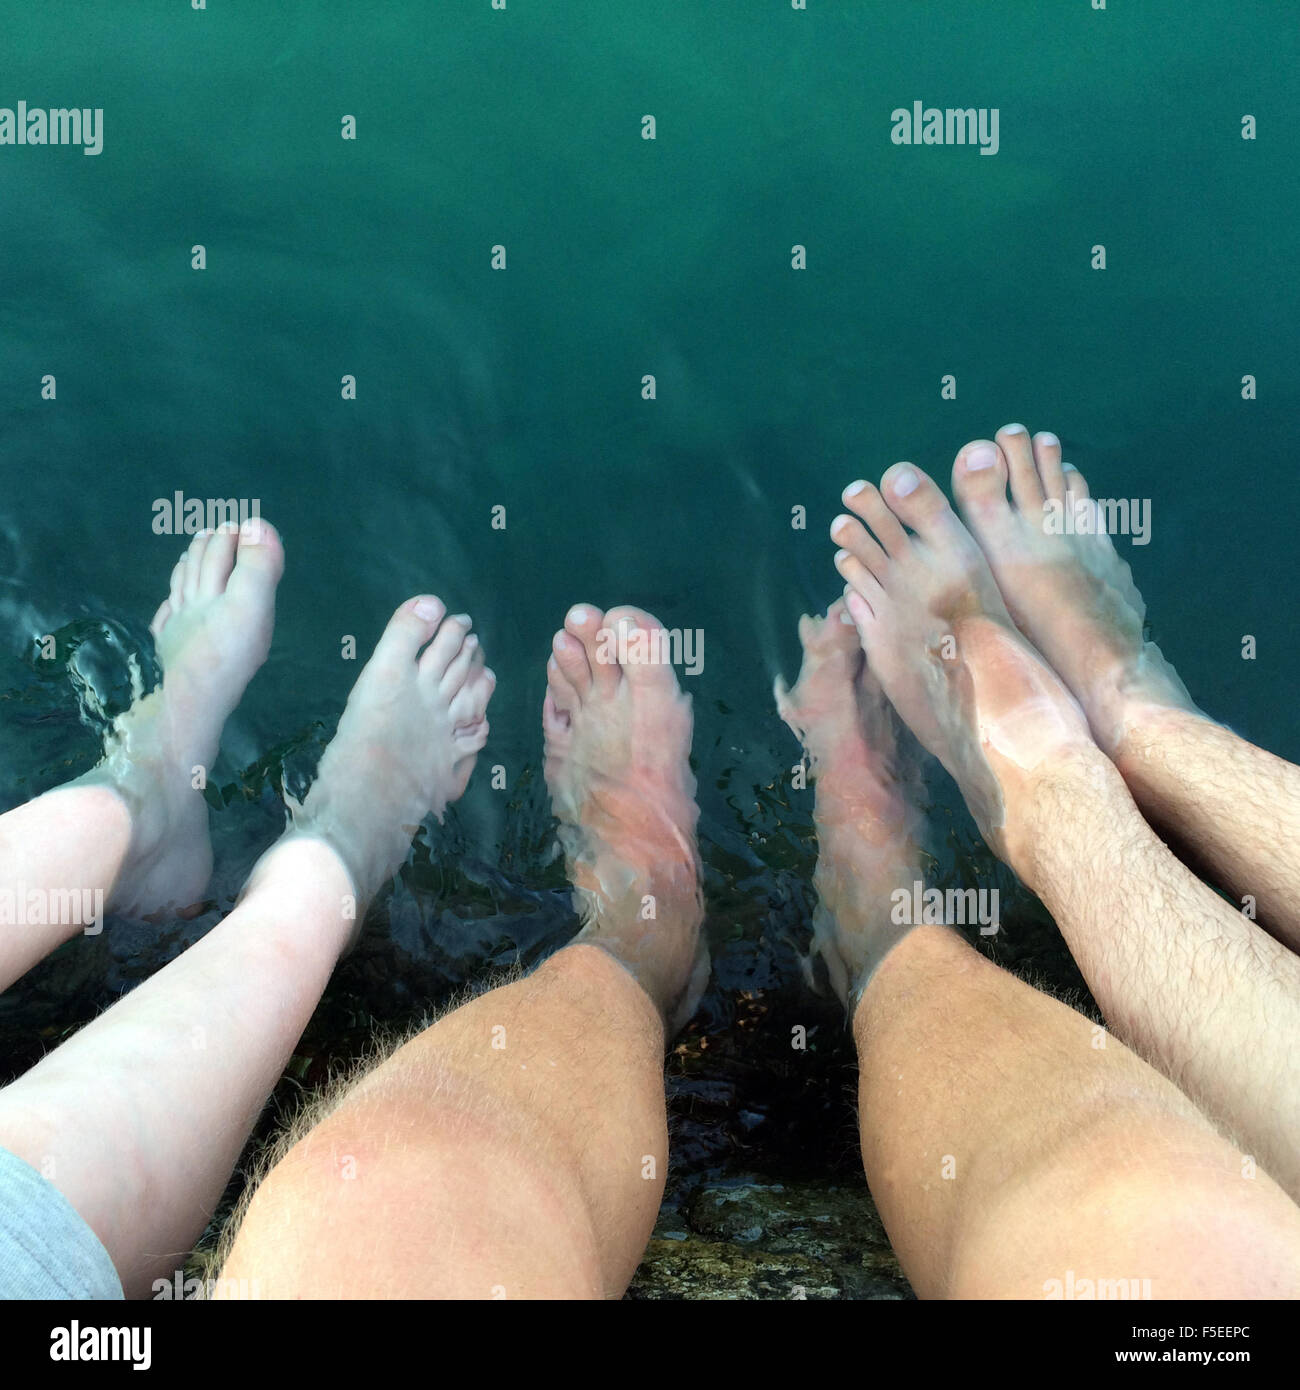 Three men with their feet in water Stock Photo